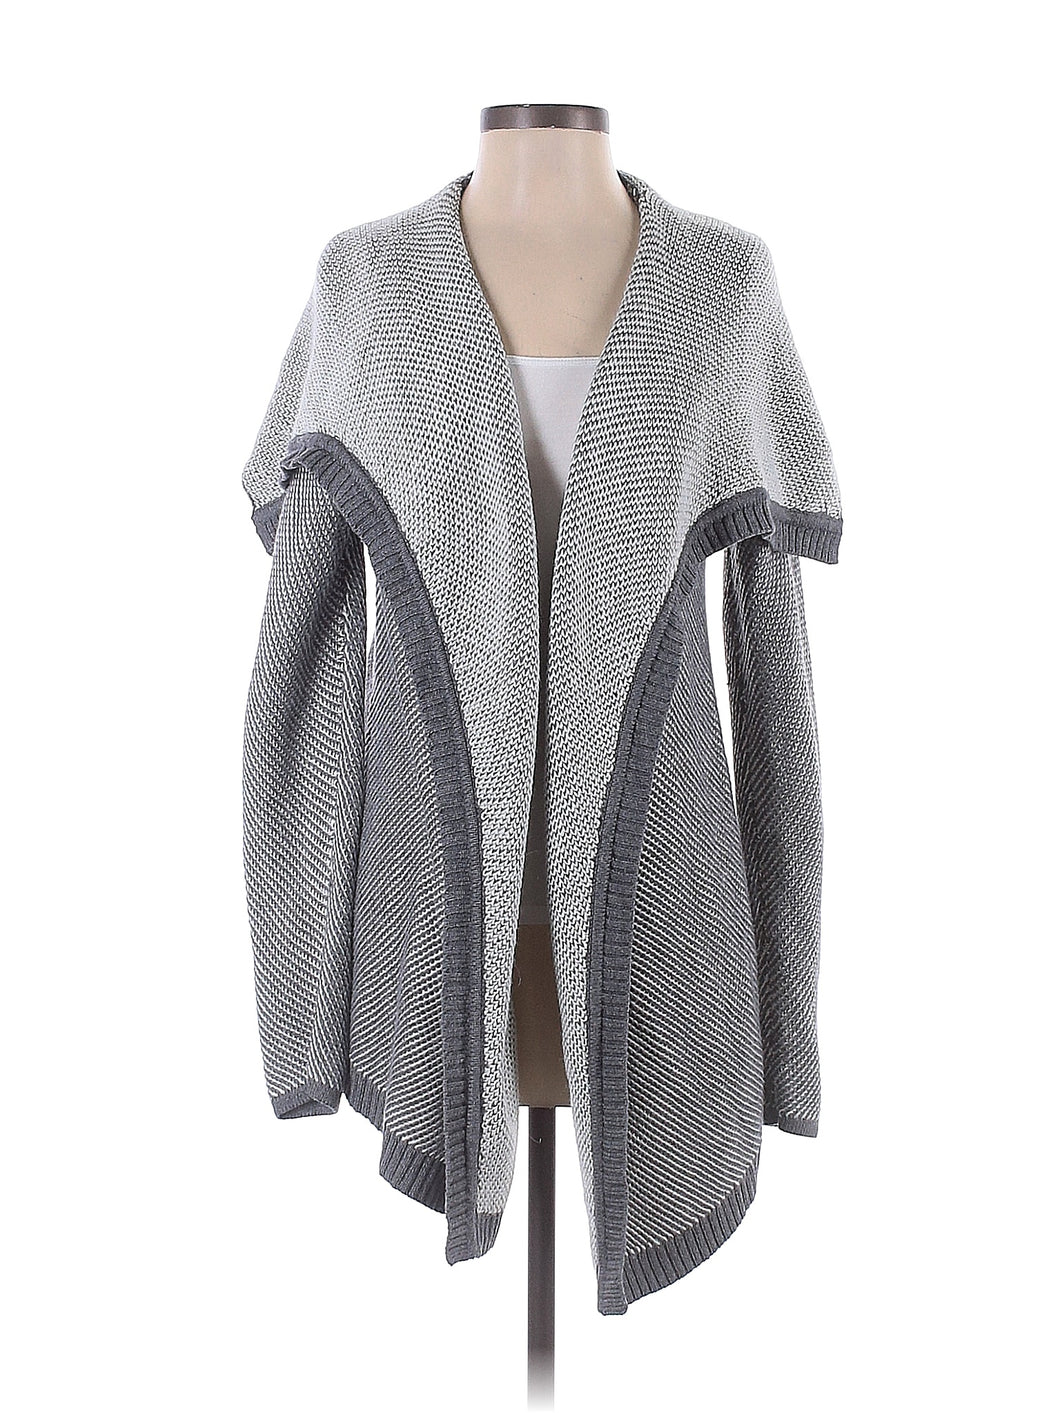 Ann Taylor Chunky Grey and White Cardigan - Large